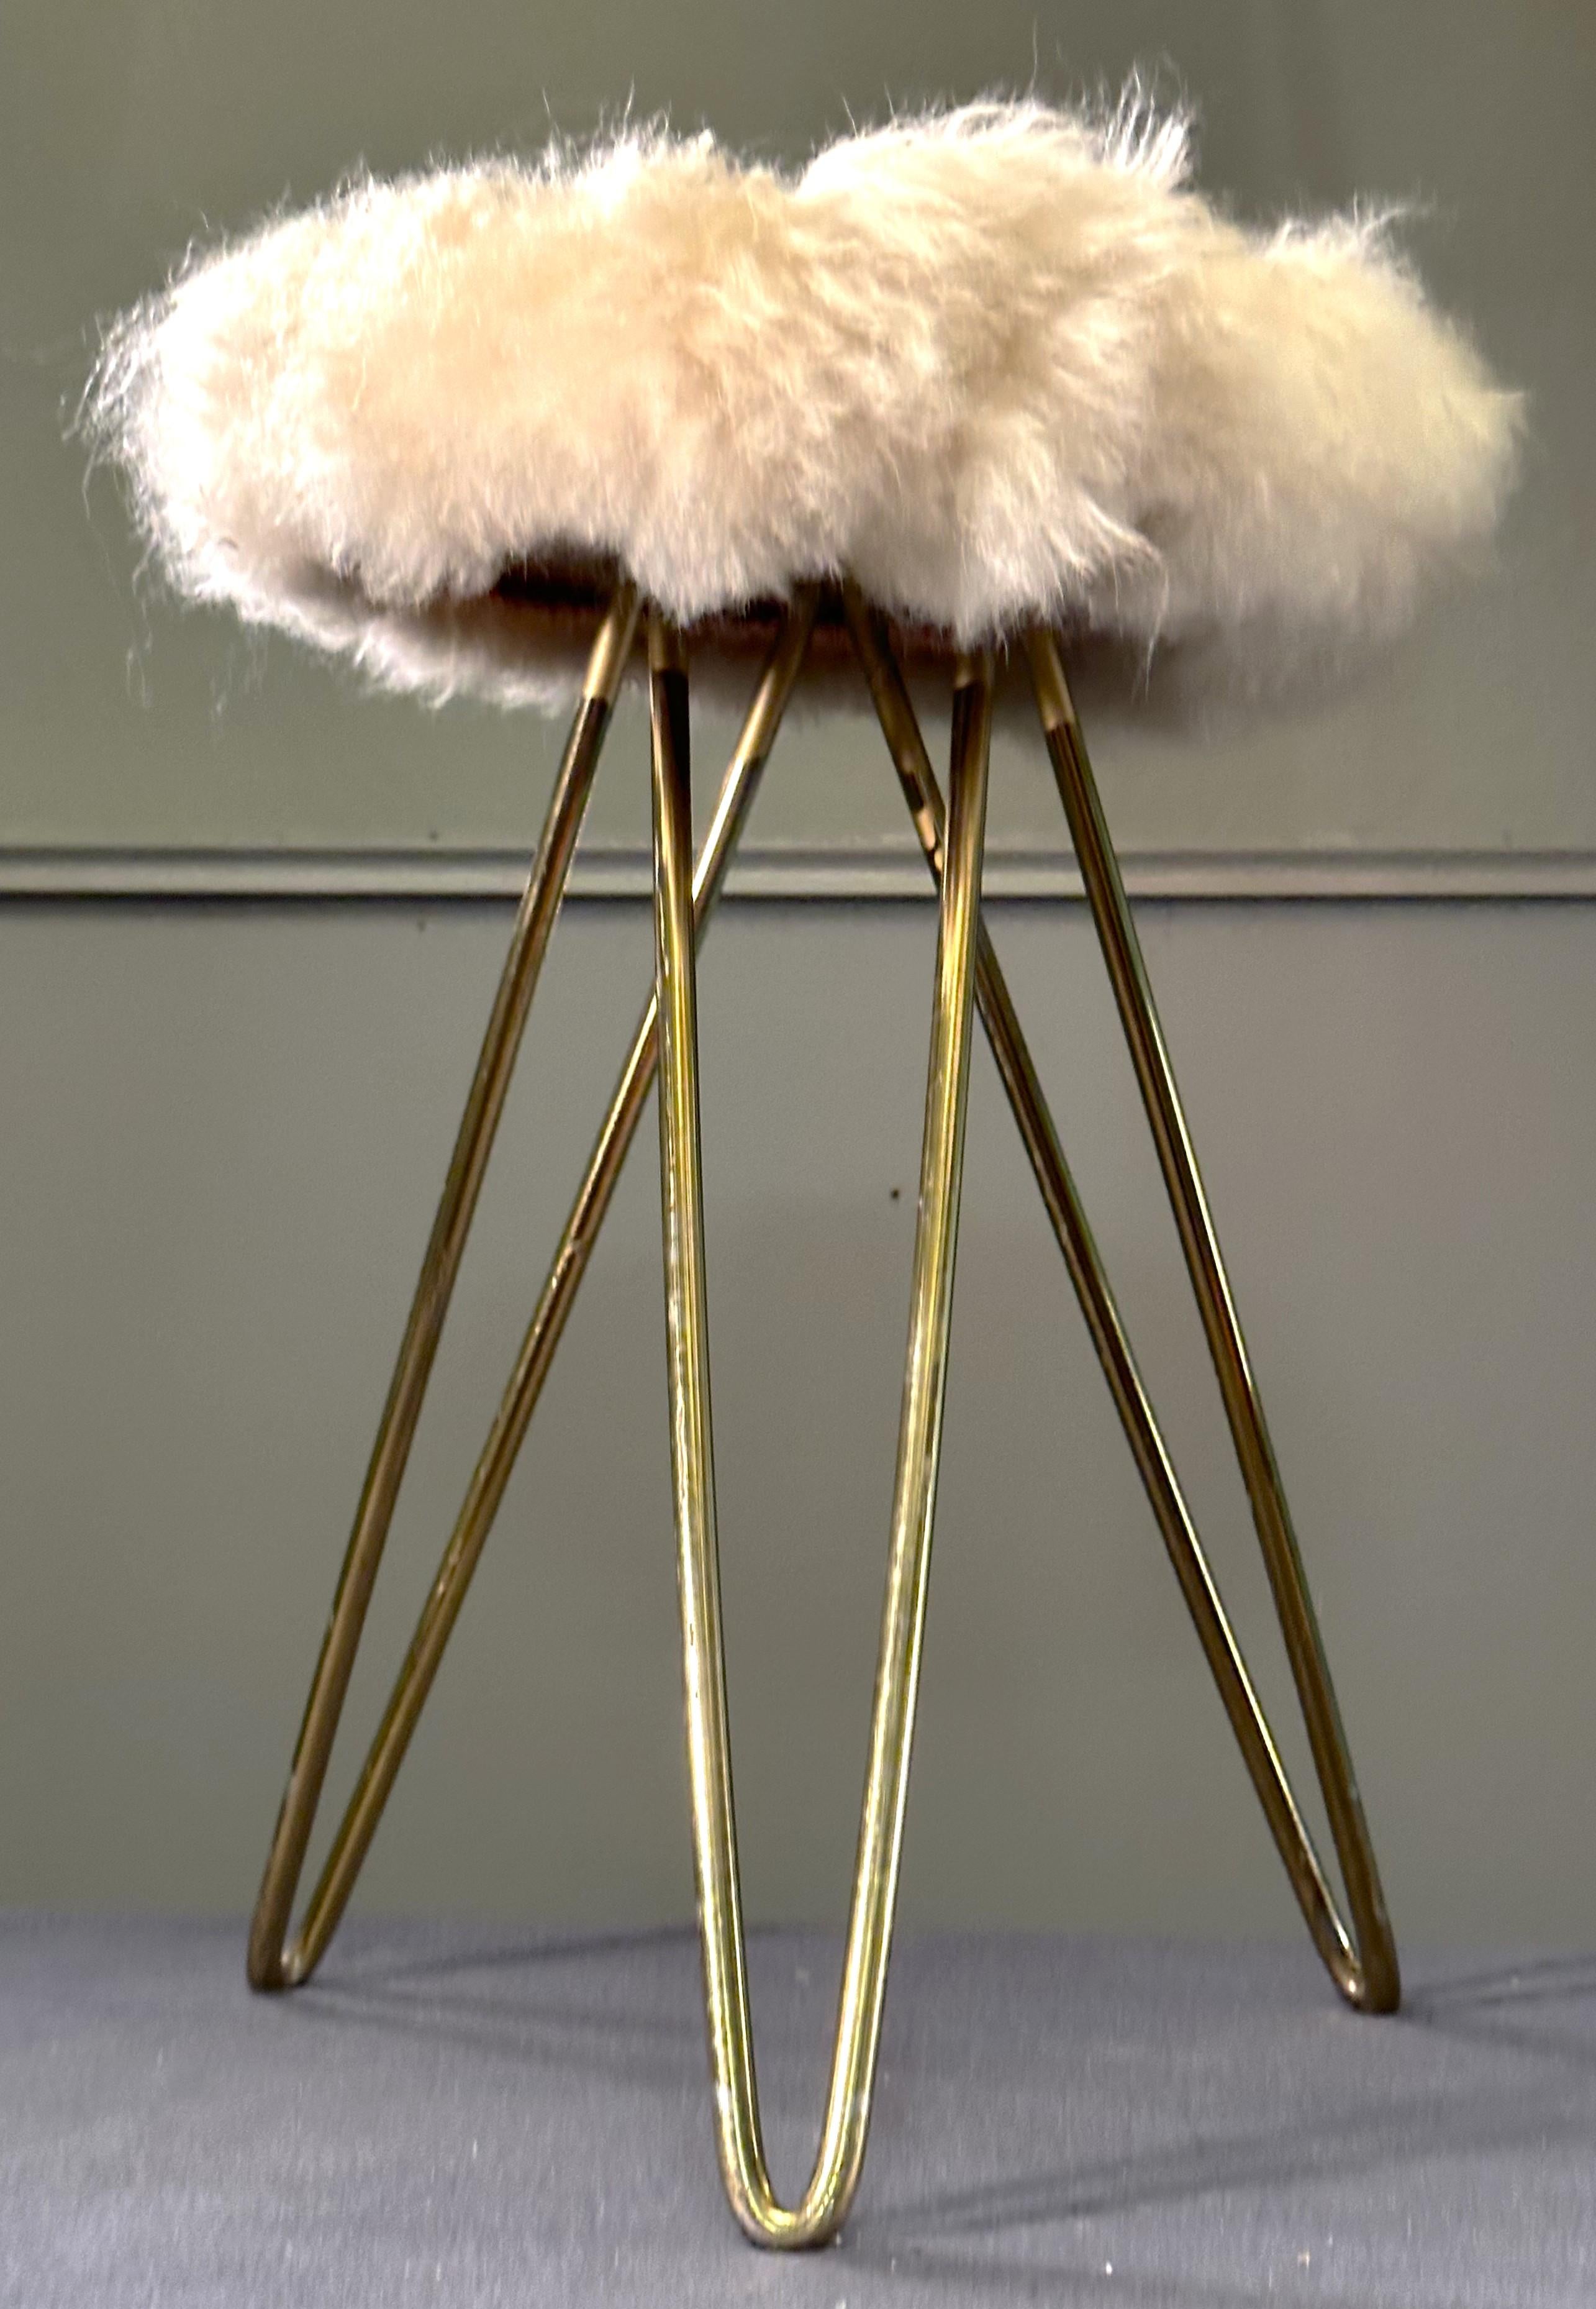 Metal Mid-Century Hairpin Legs Fur Stool, 1950s, France For Sale